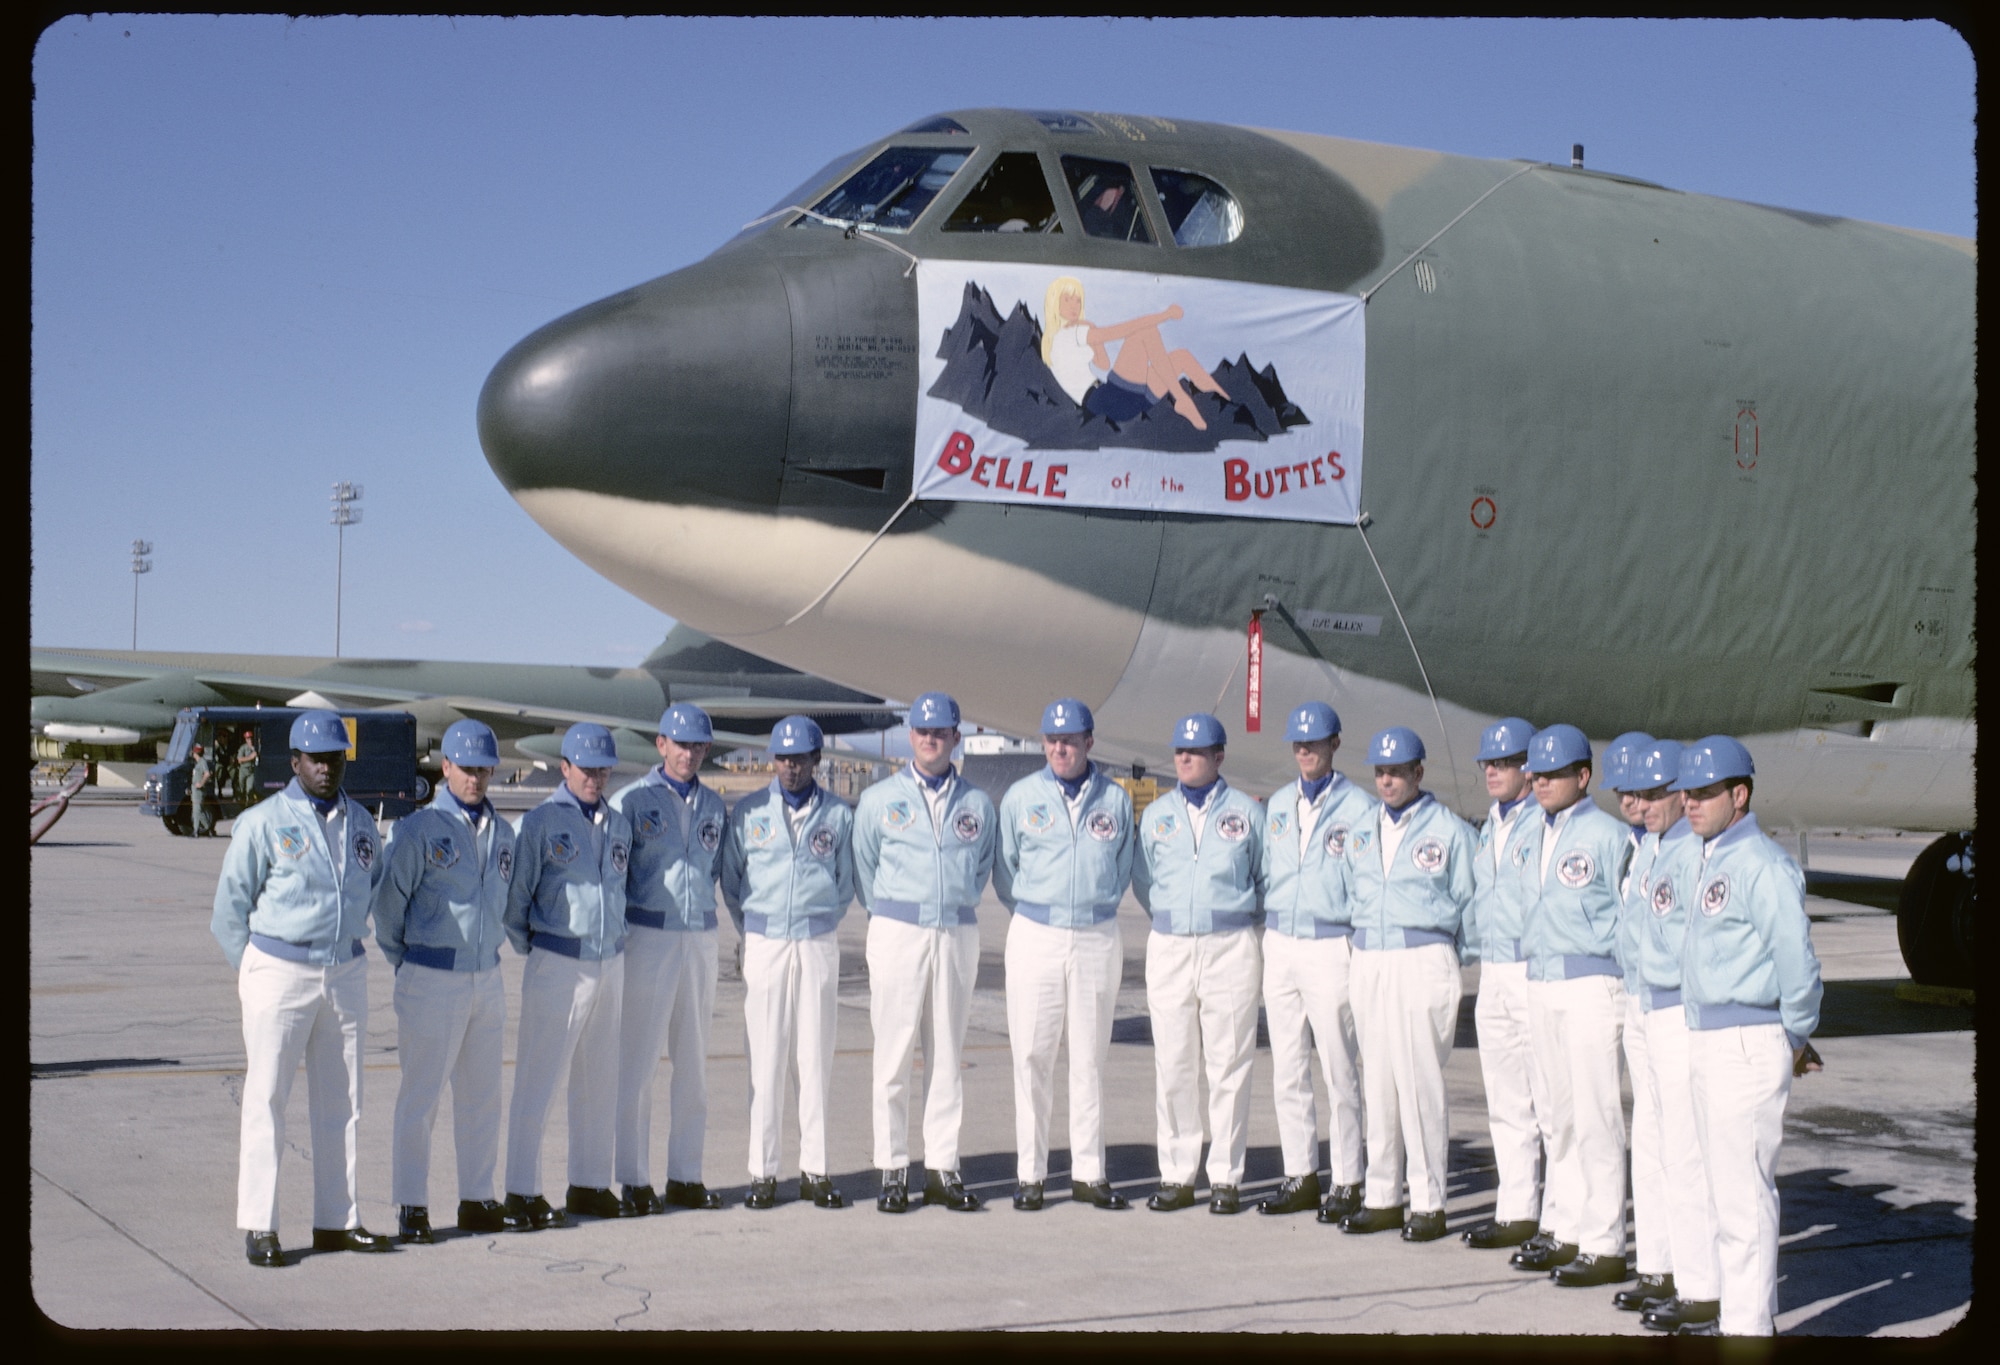 Members of the 4126th Strategic Wing pose for a photo in front of a B-52 Stratofortress on the flightline at Beale Air Force Base, Calif. On Feb. 8, 1959, Strategic Air Command established Beale as an operational Air Force Base and activated the 4126th Strategic Wing. (Courtesy photo)